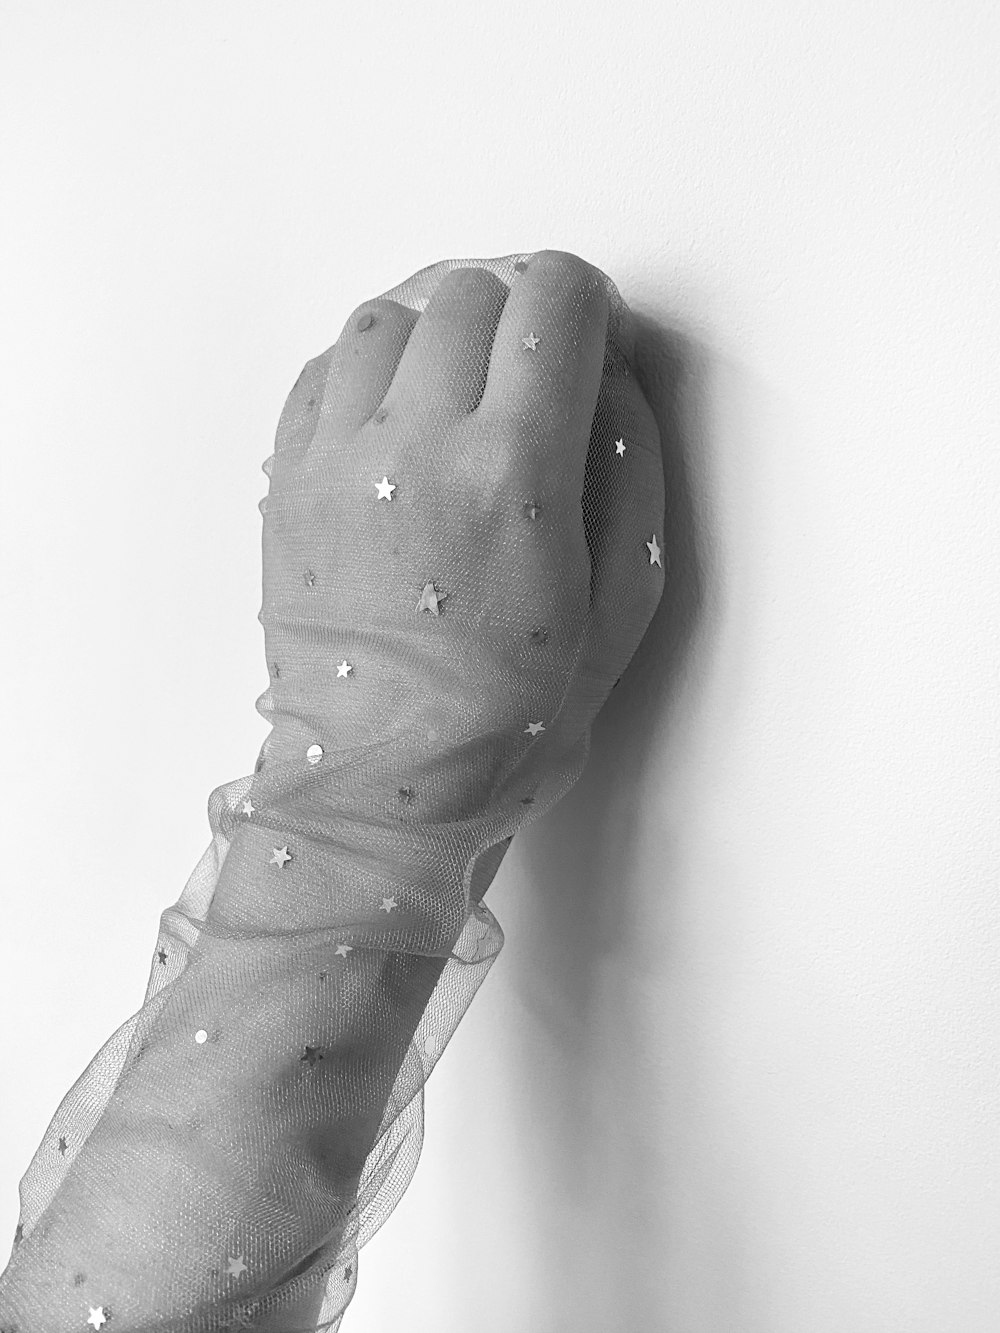 a black and white photo of a glove with stars on it